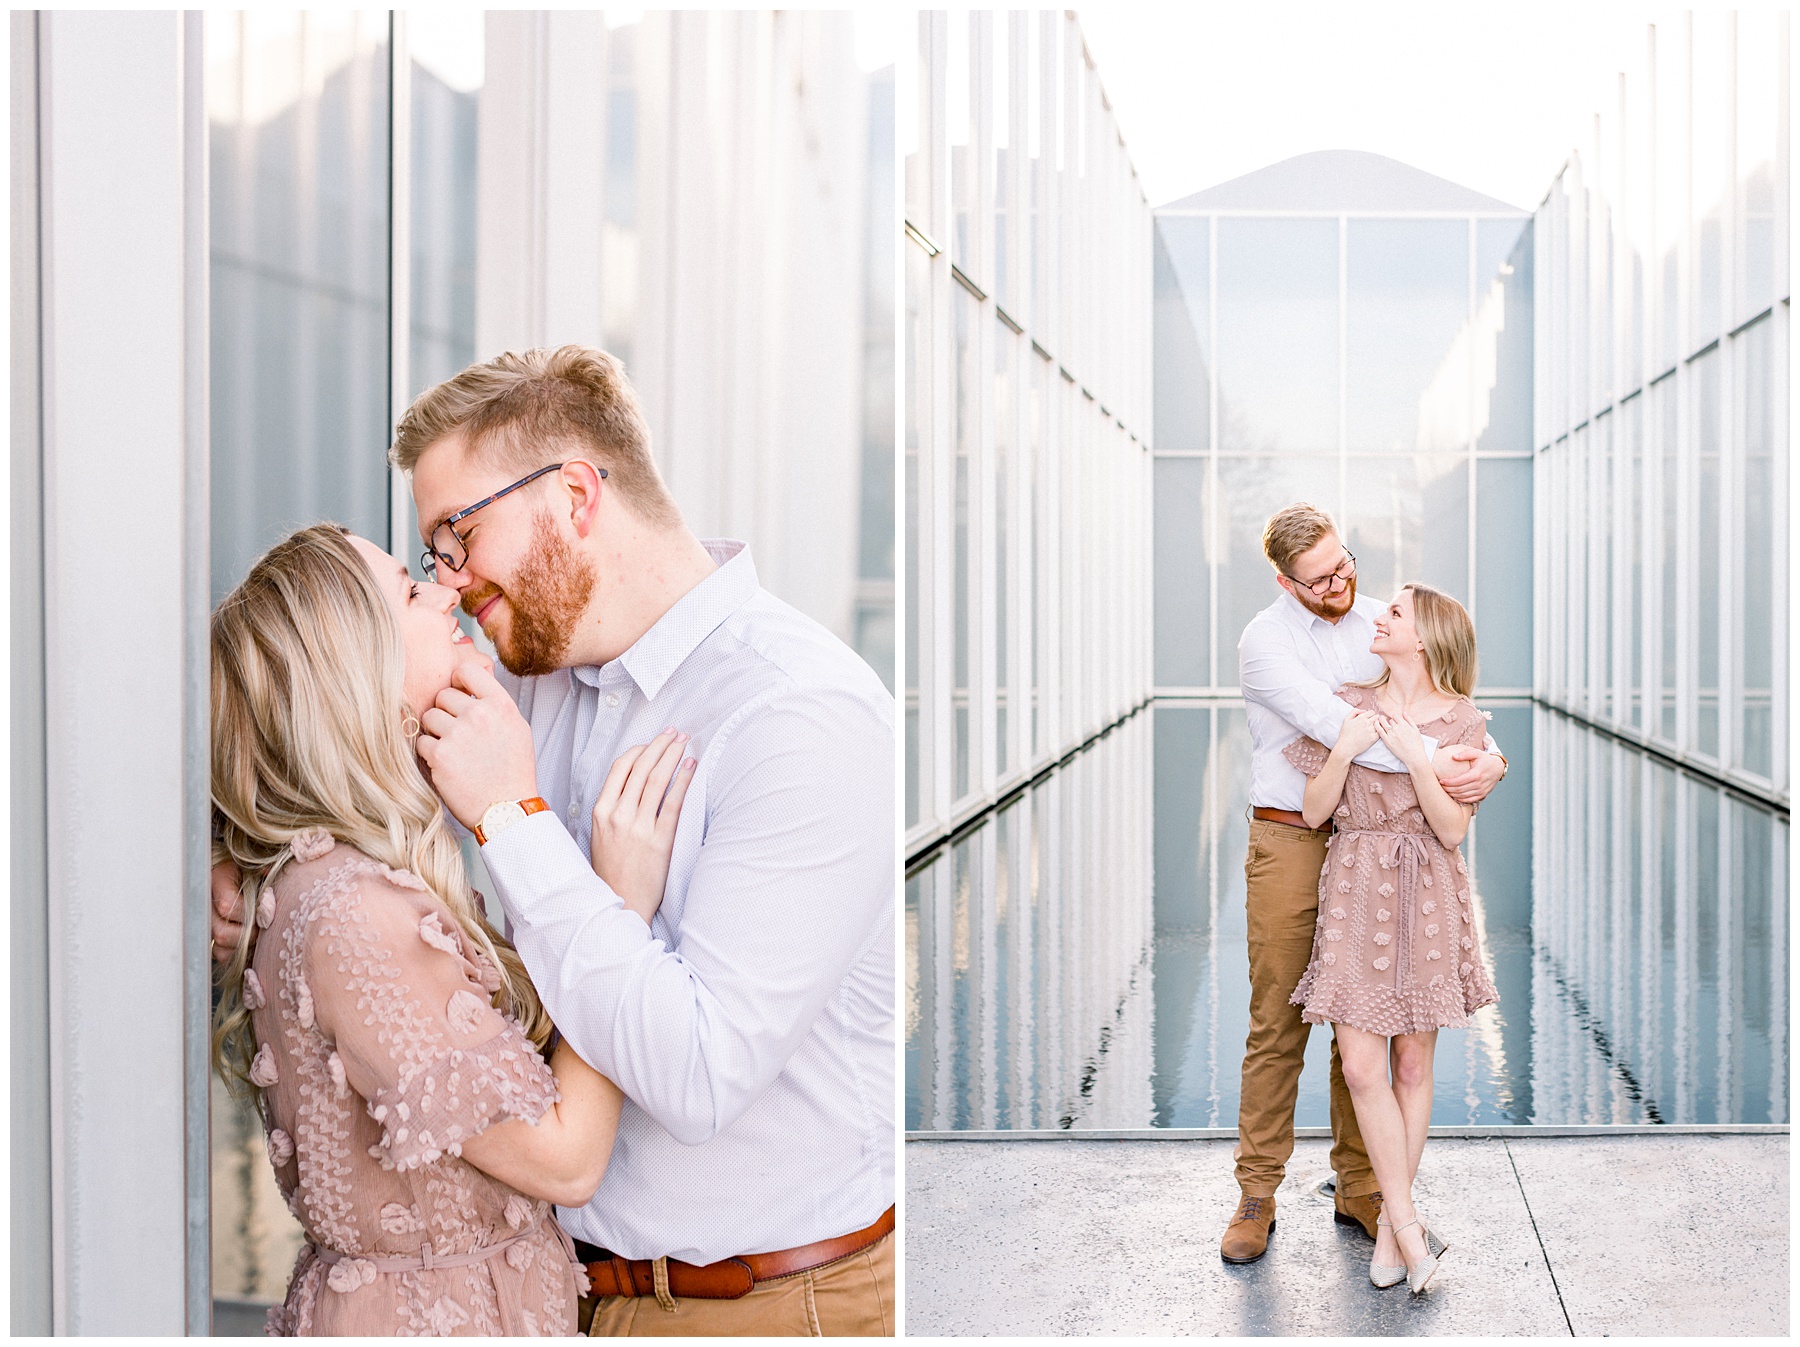 North Carolina Museum of Art Spring Engagement Session in Raleigh North Carolina at art exhibit